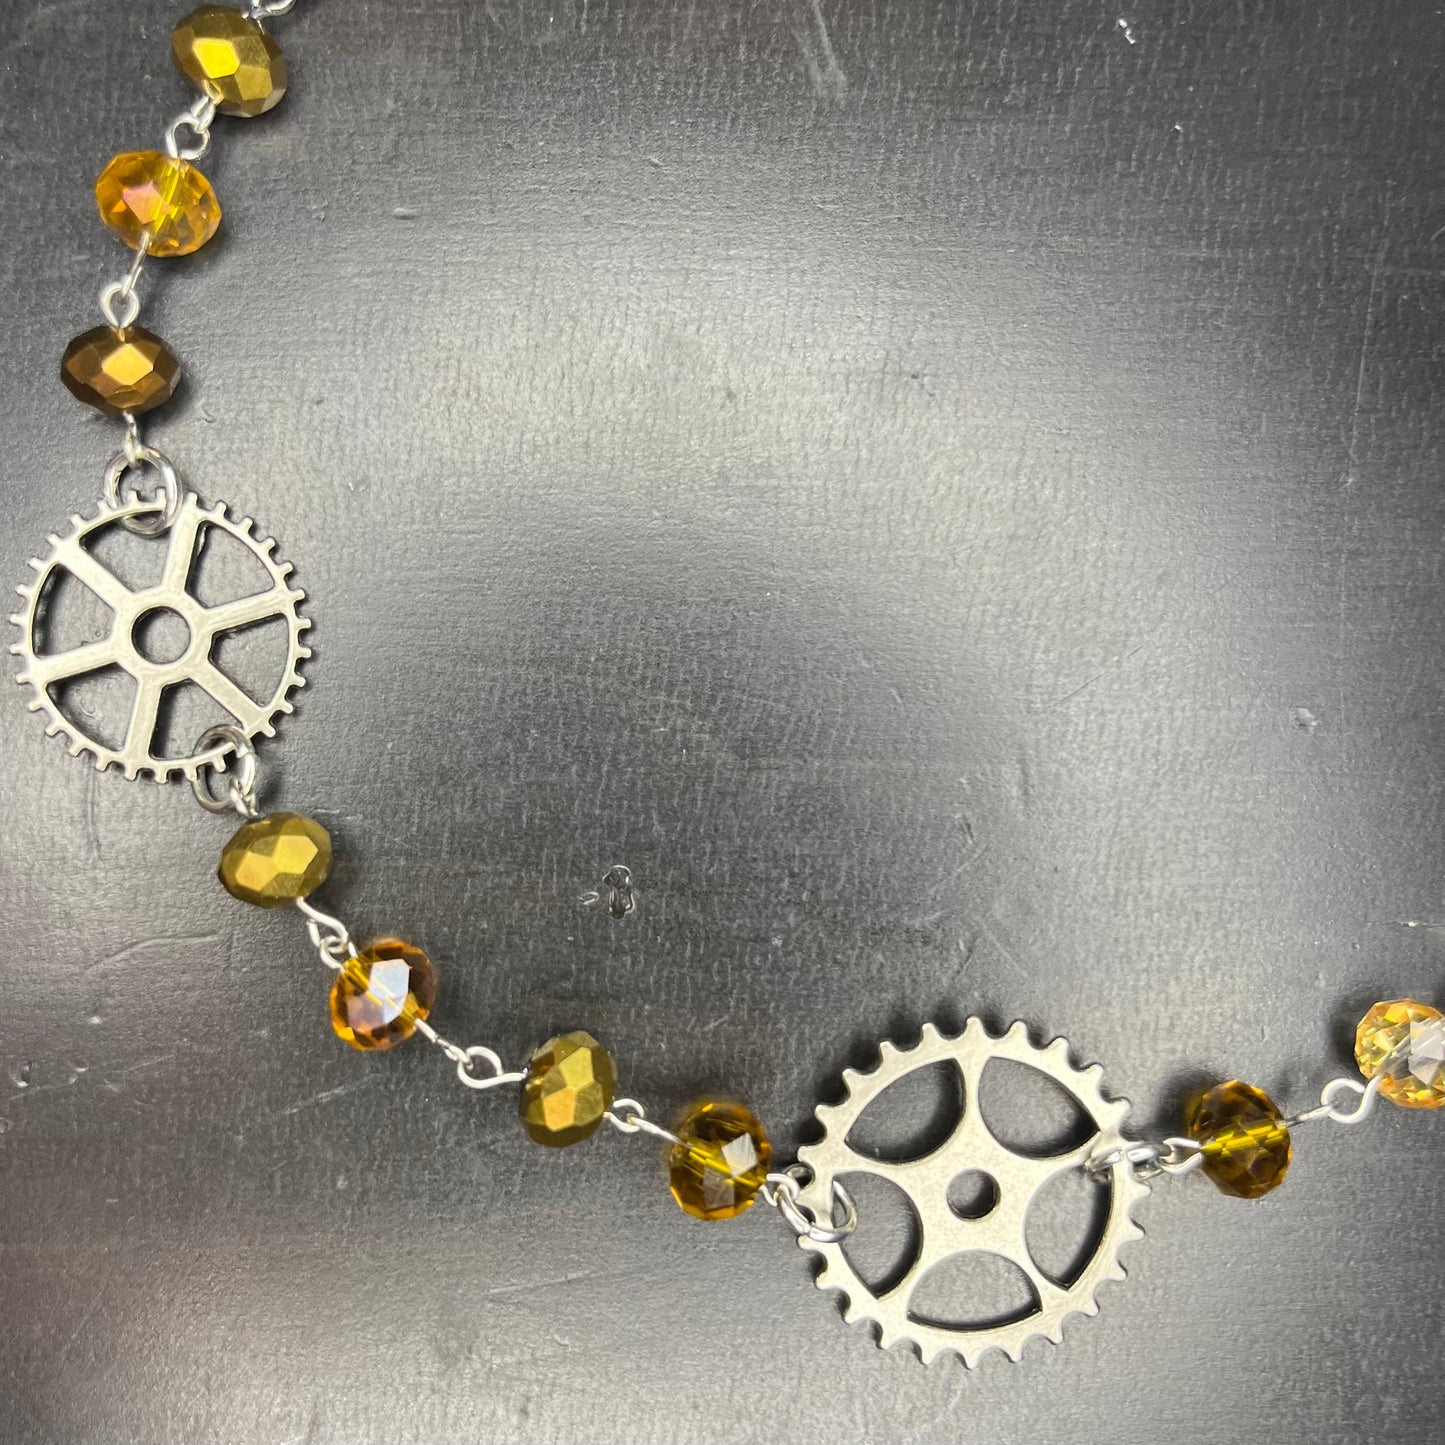 Steampunk Inspired Necklace